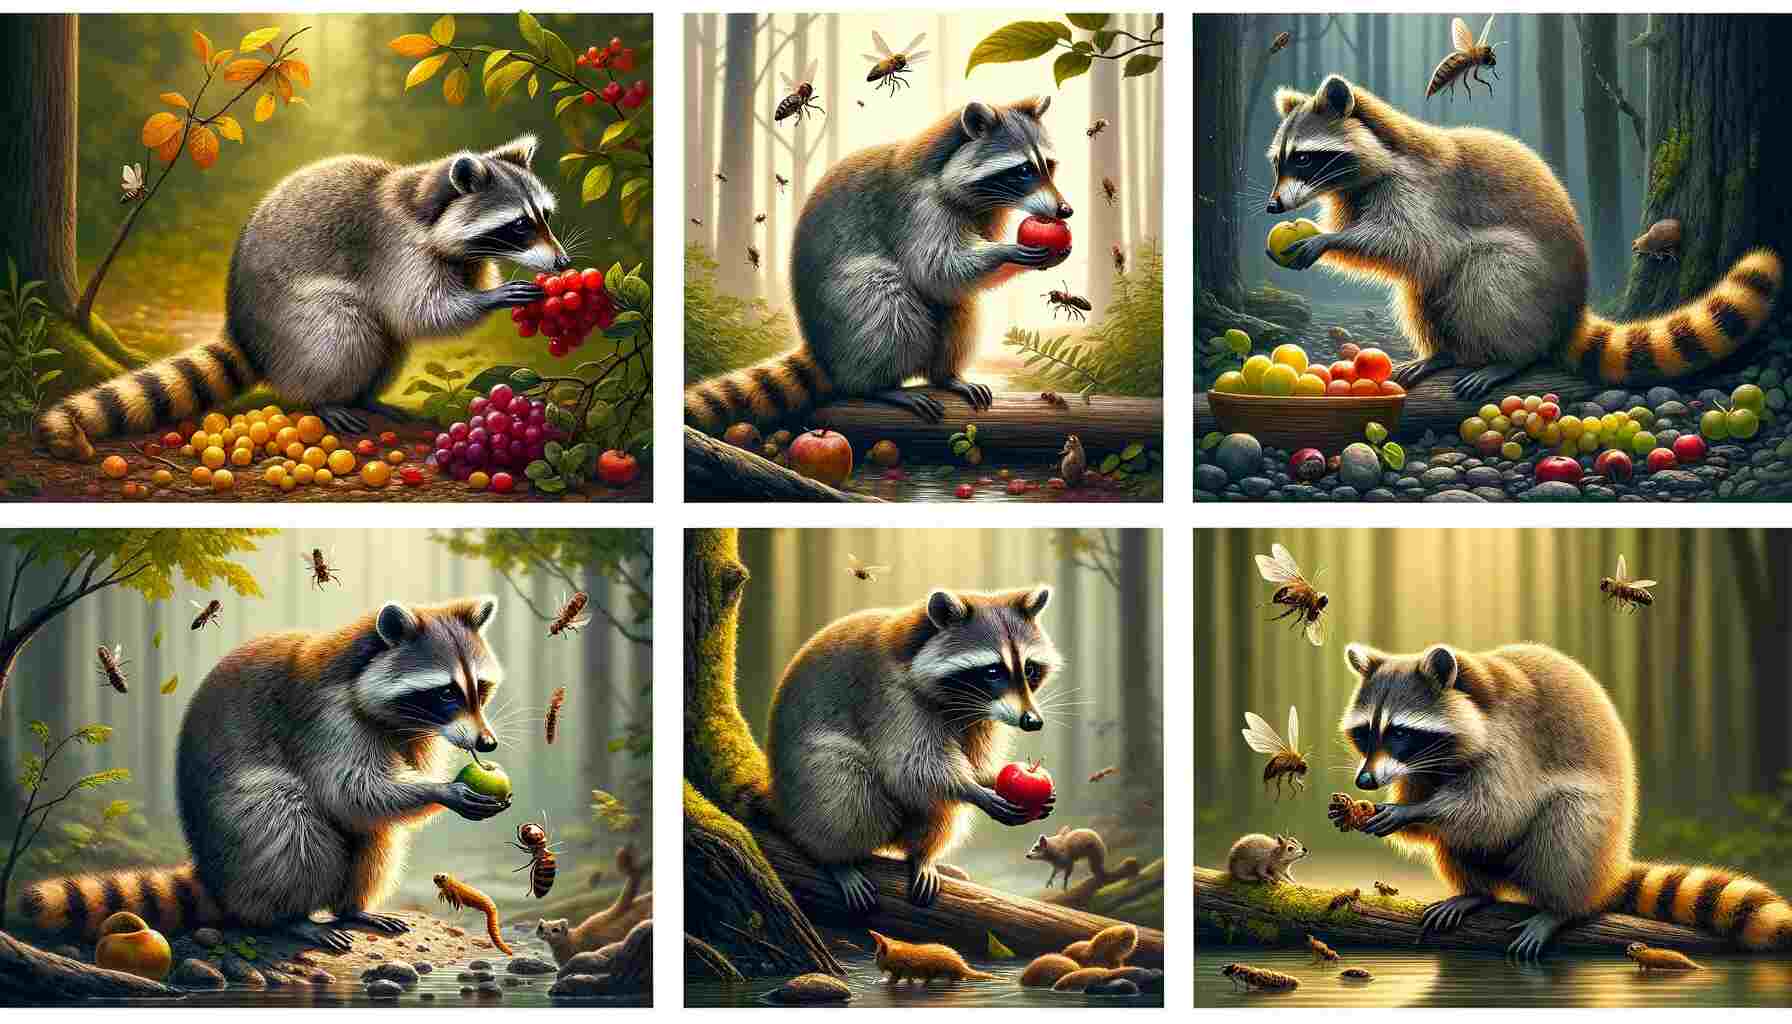 Here is a series of images depicting raccoons in various scenarios related to their diet and feeding habits. The visuals show a raccoon eating fruits in a forest, foraging for insects, and preying on a small mammal, each set in different environments. These images showcase the raccoon's adaptability and resourcefulness in finding food in diverse settings, highlighting its omnivorous nature.